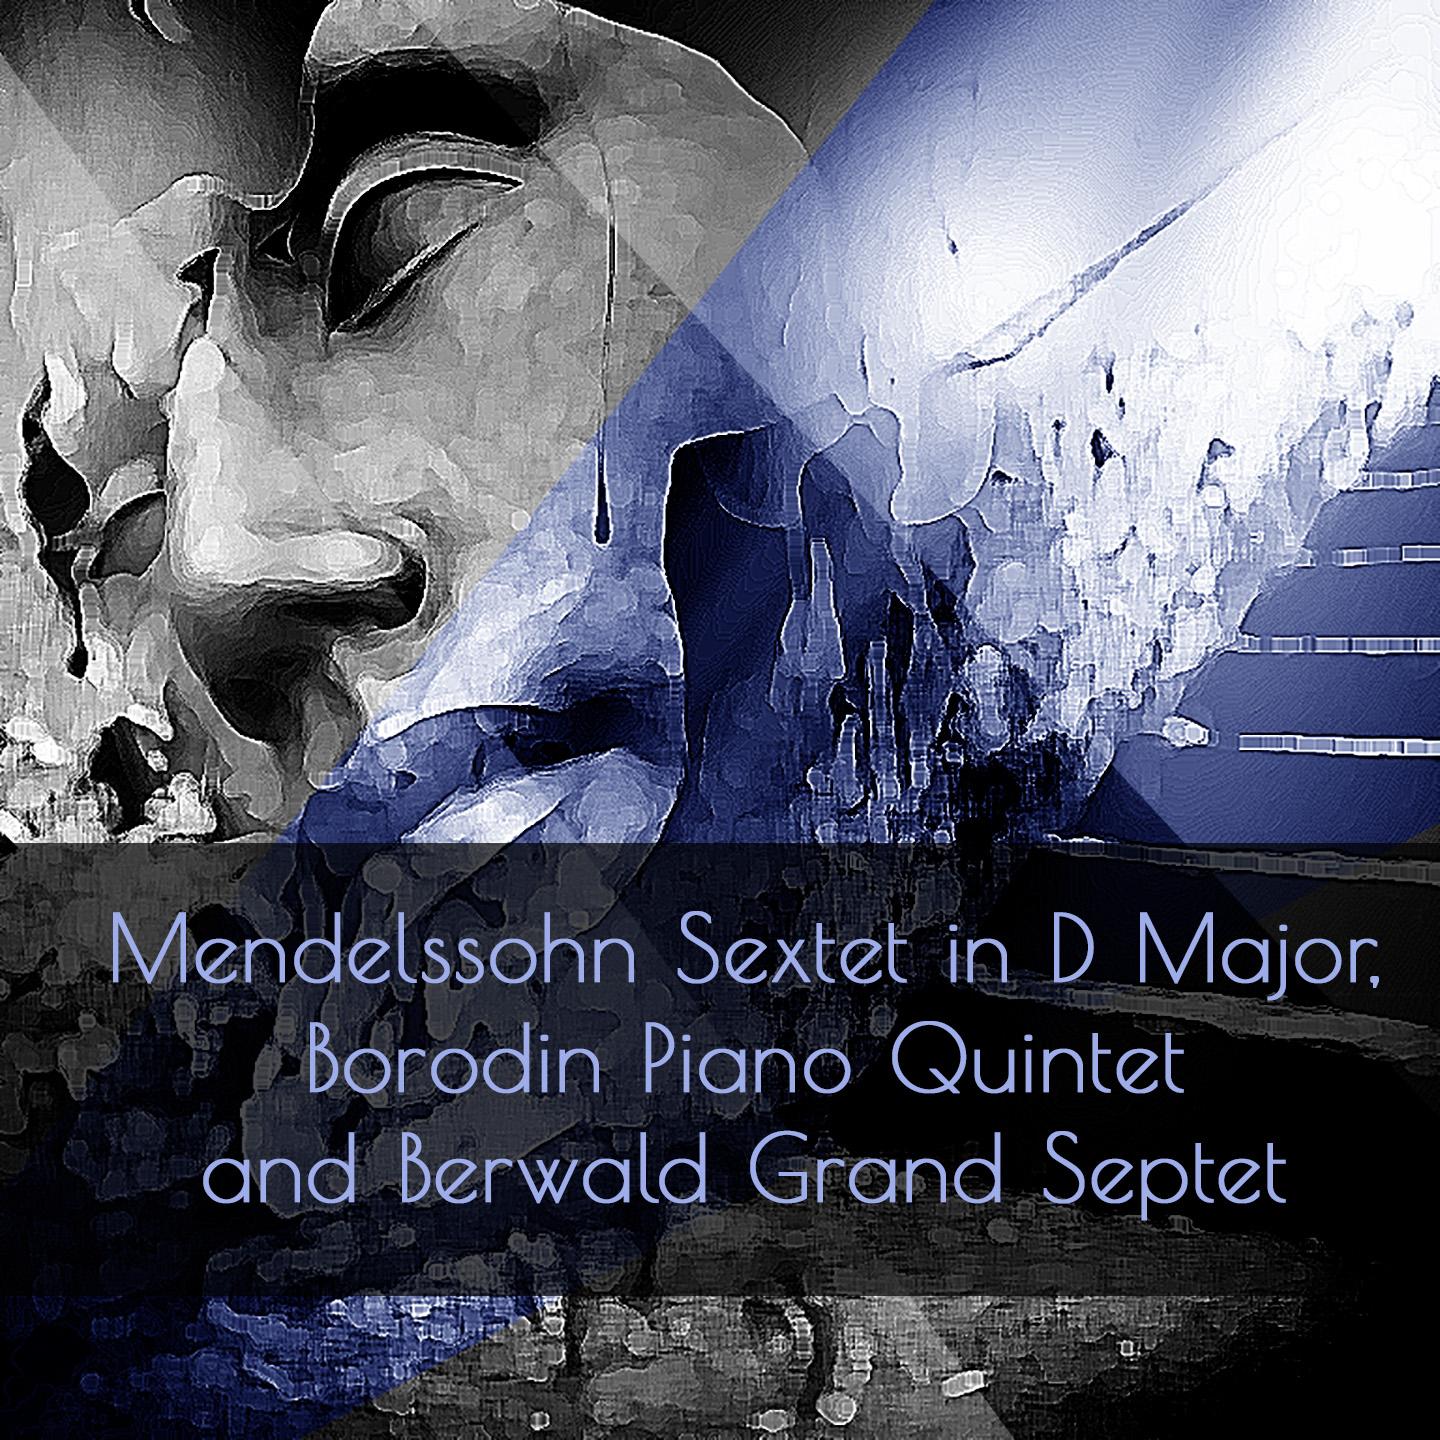 Sextet for Violin, Violas, Cello, Double Bass and Piano in D Major, Op. 110: II. Adagio